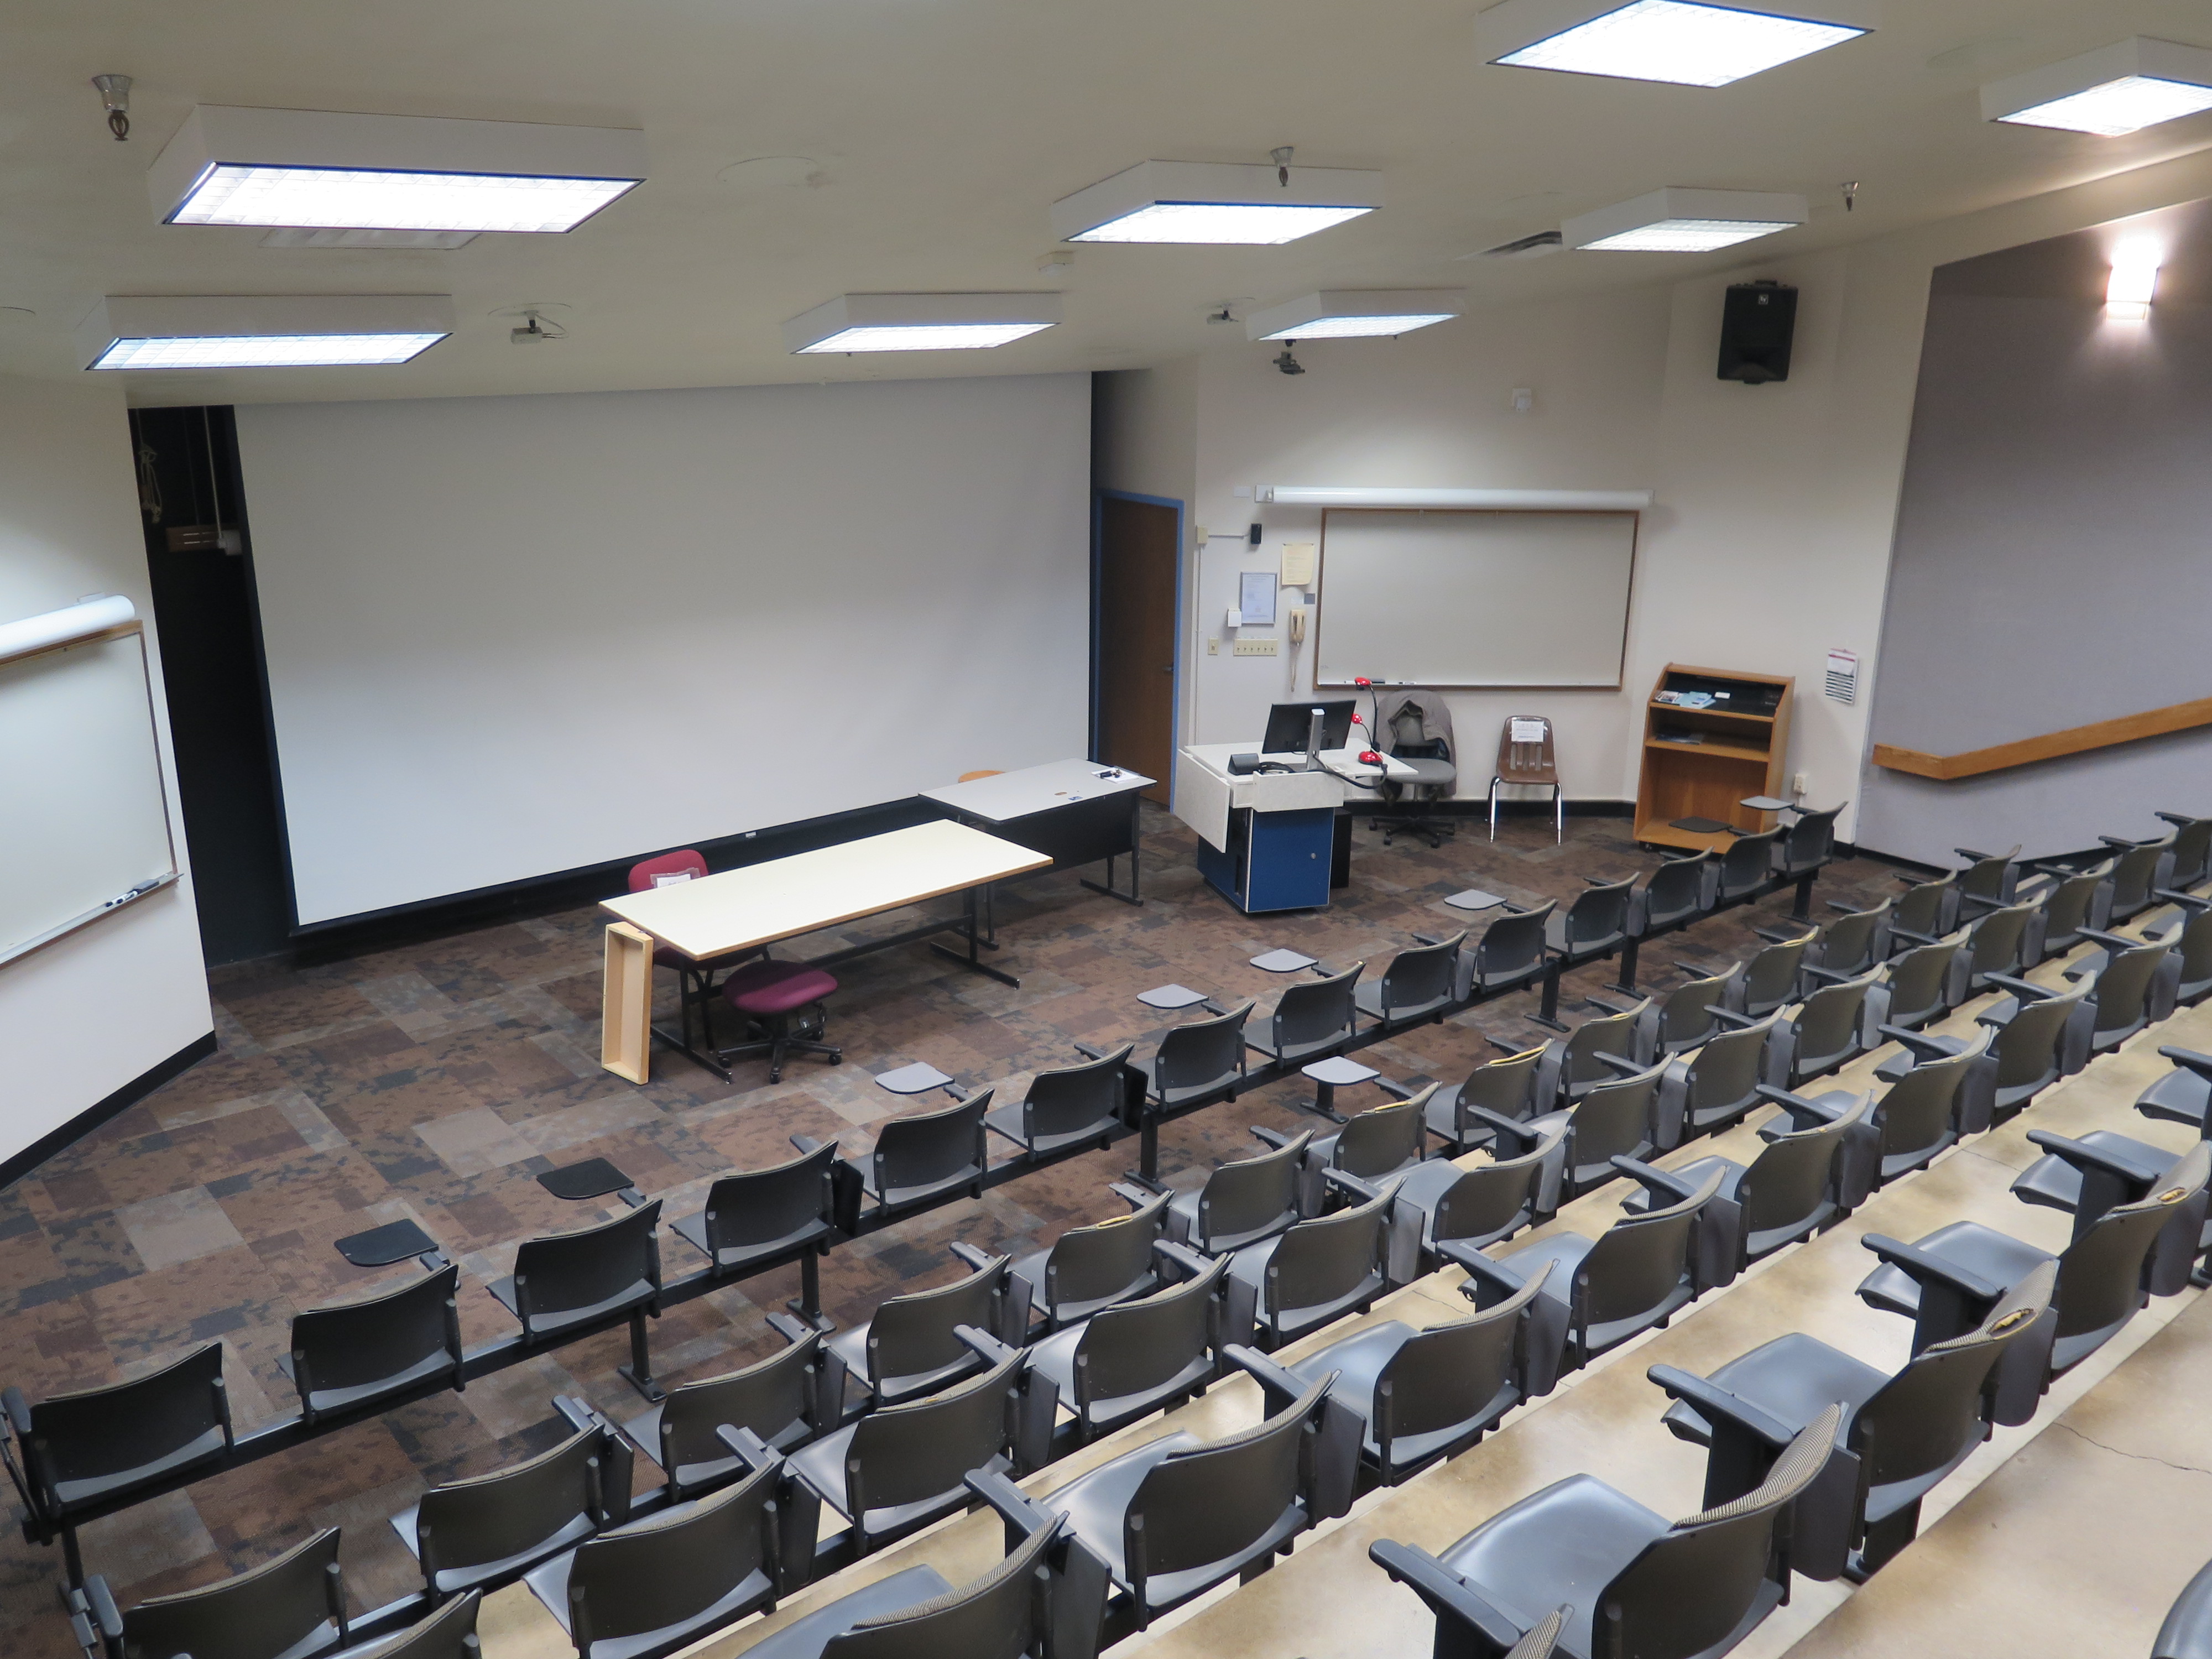 Room Consists of carpet floors, Stationary rows of tablet armchairs in auditorium style with each row of seats going down a level until you reach the front of the room, a white board and podium are both located at the front of the room. 